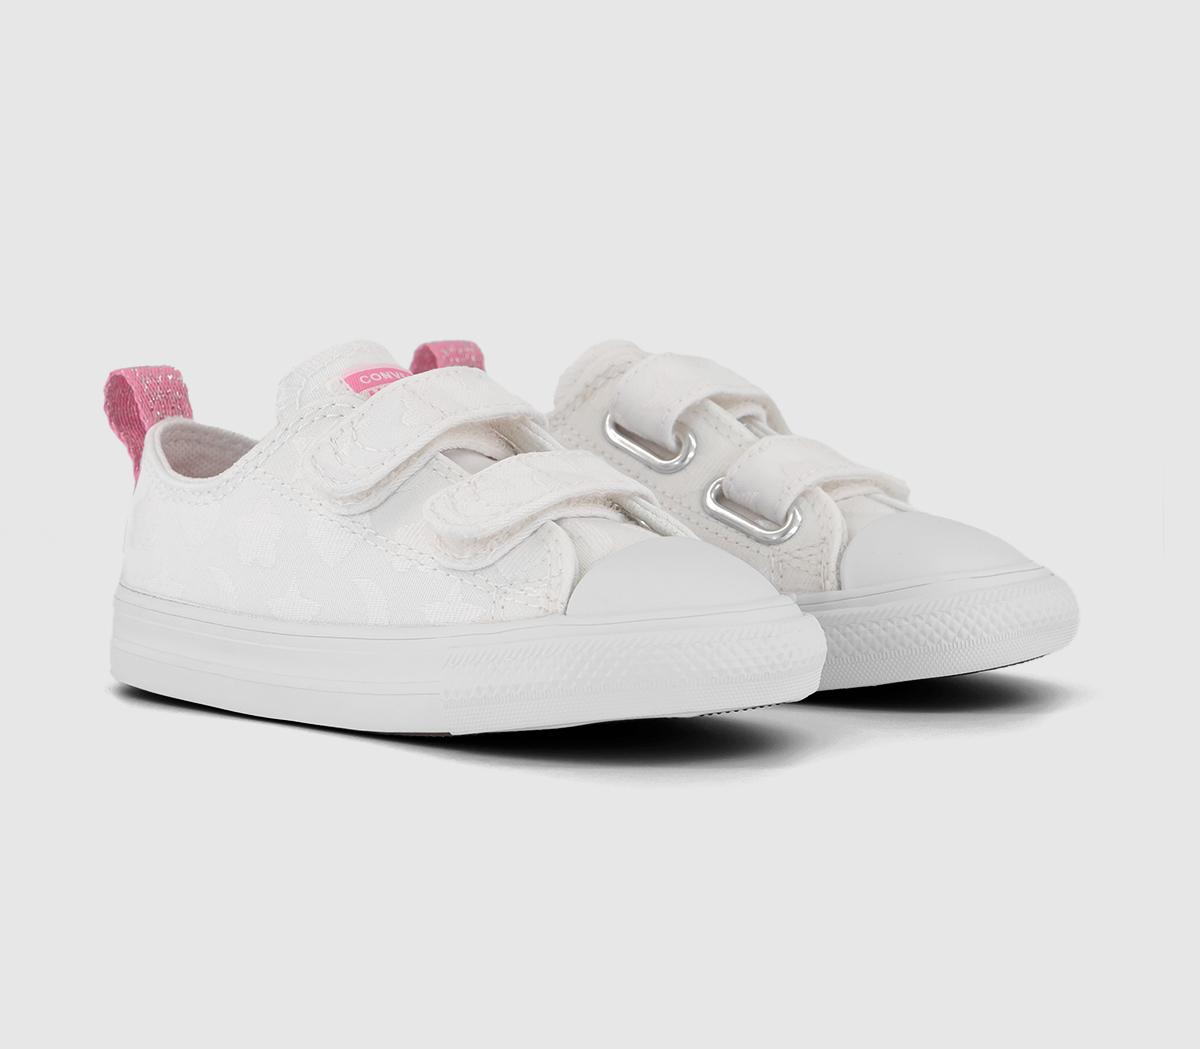 Converse Kids All Star 2vlace Trainers White Oops Pink, 6infant